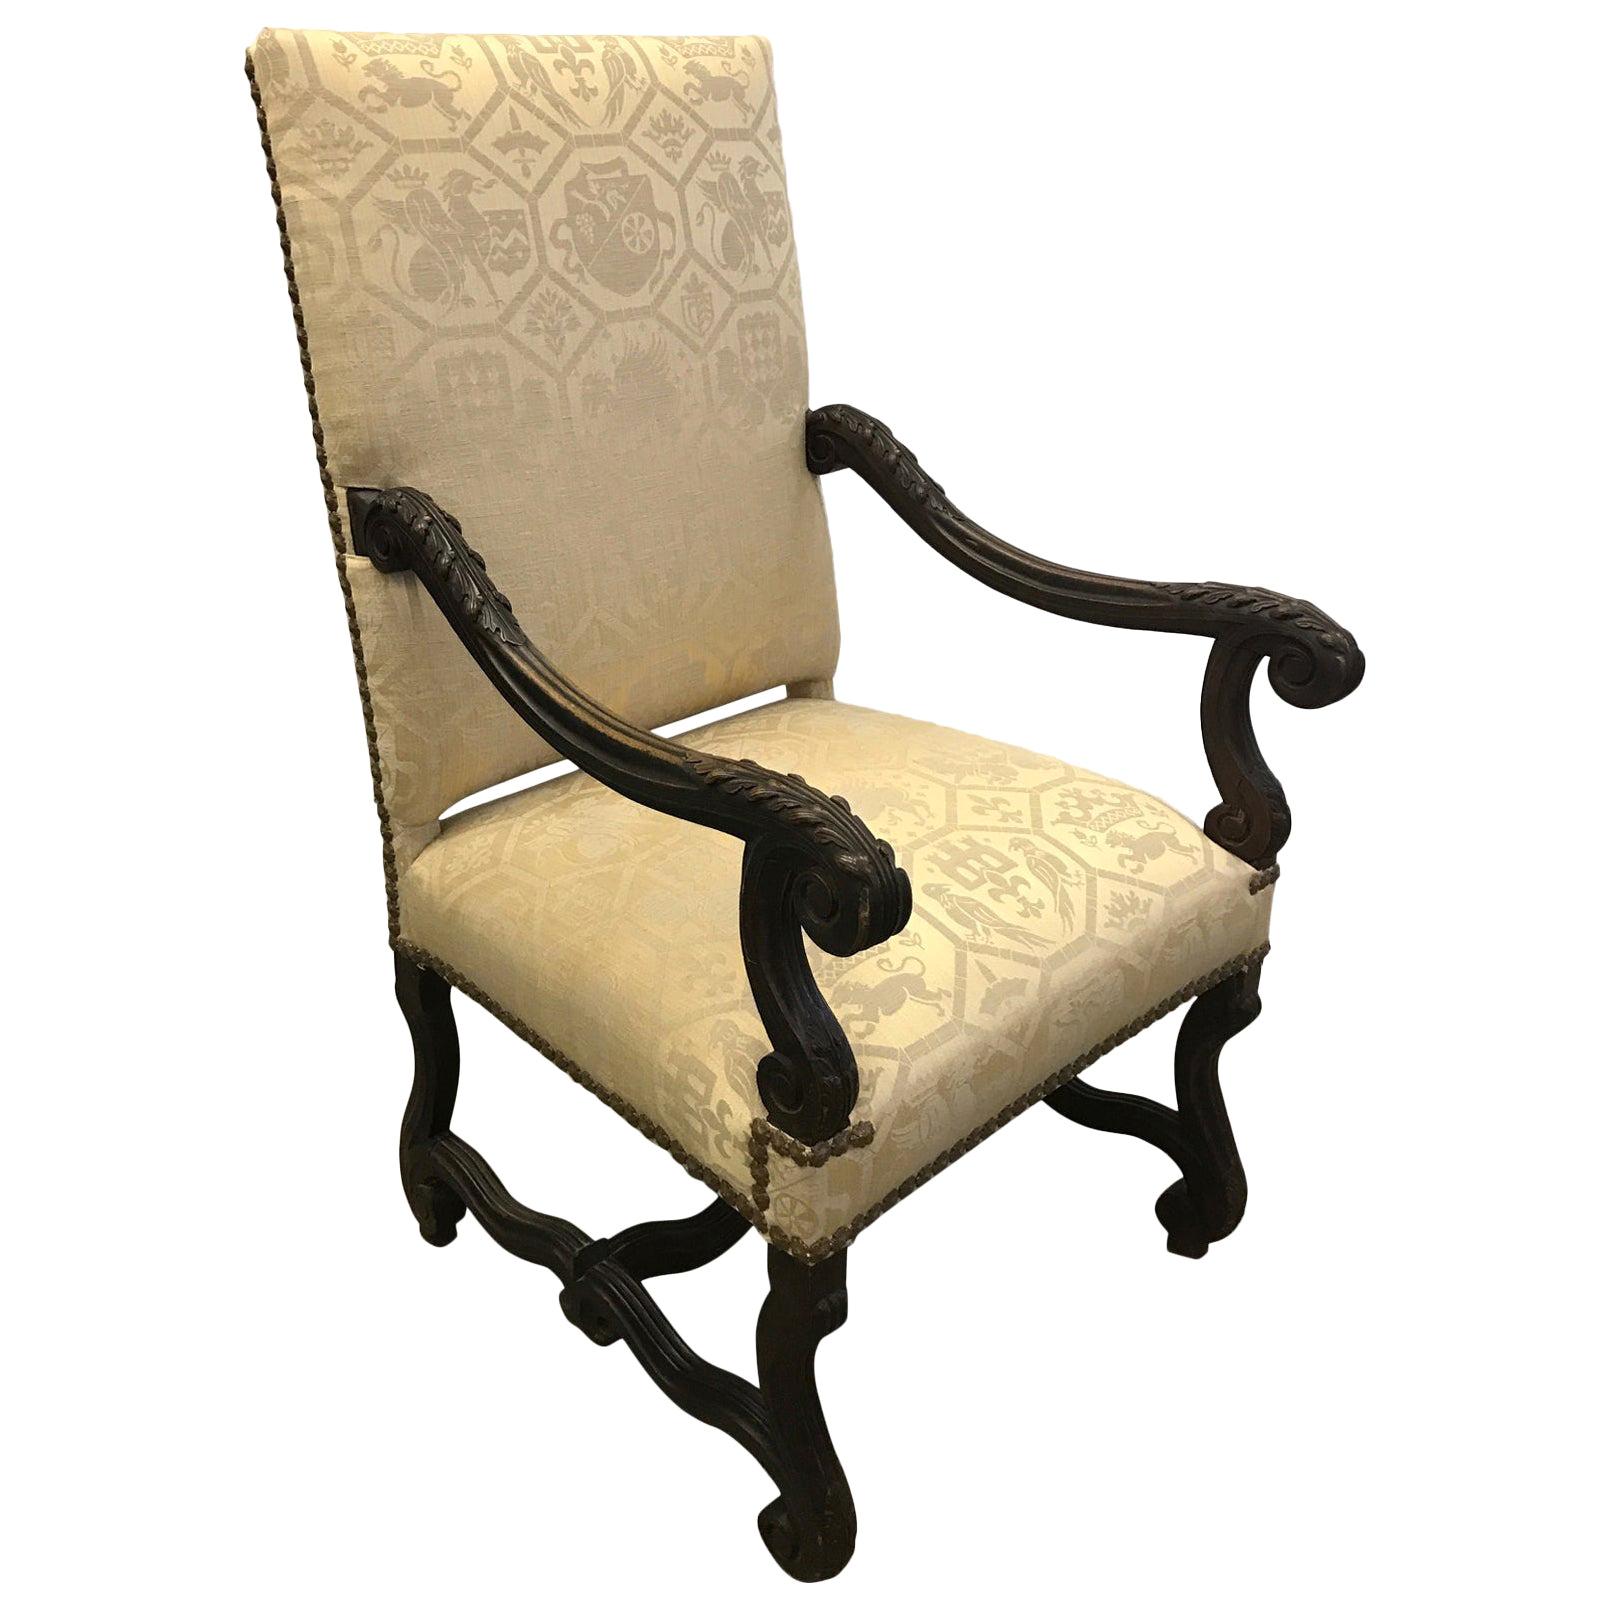 Antique English Carved Walnut Lolling Chair with Brass Trim, circa 1880 For Sale